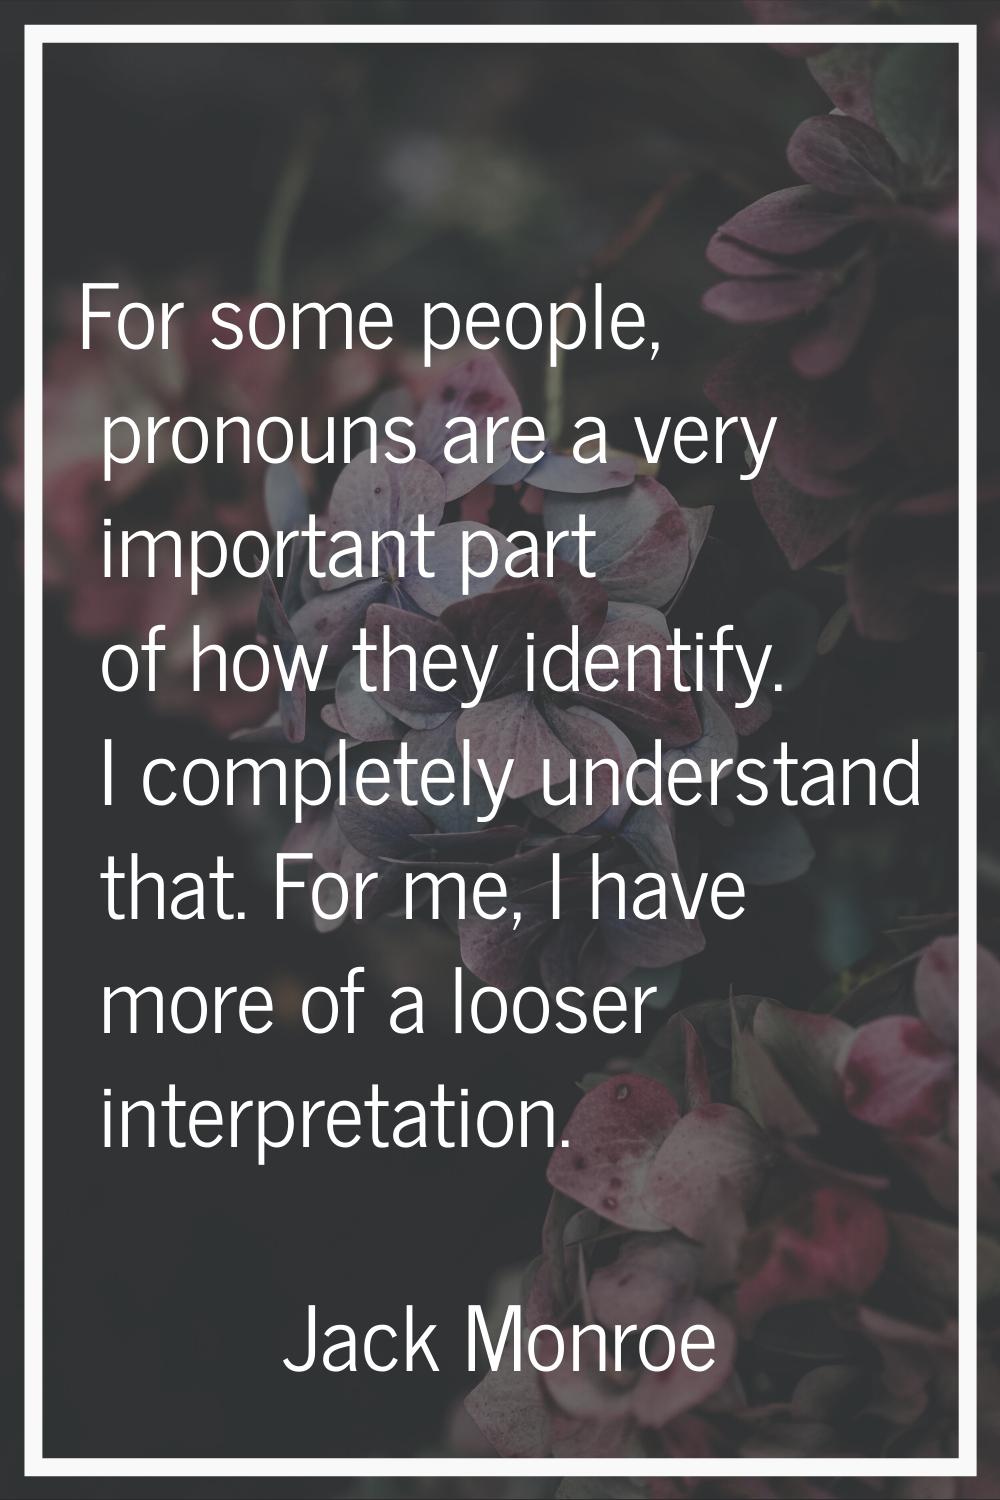 For some people, pronouns are a very important part of how they identify. I completely understand t